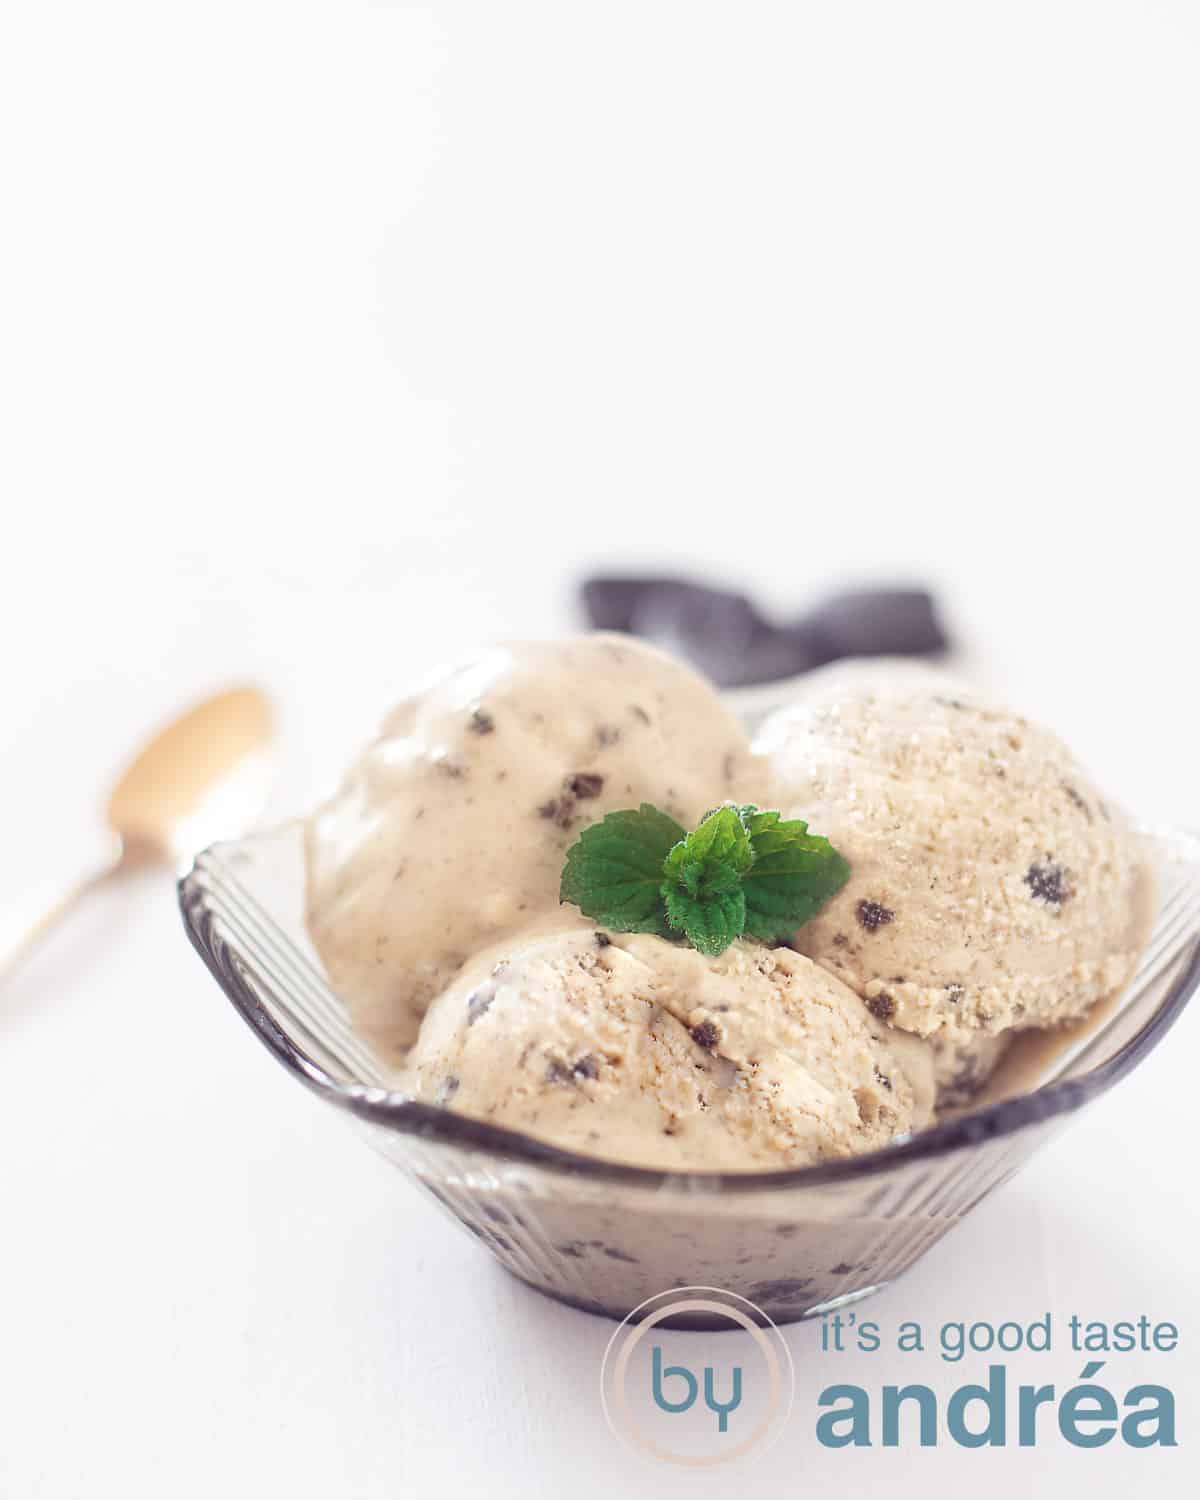 A bowl filled with ice cream with a liquorice flavour. Leaves of mint on the ice. A hand grabs a scoop of ice cream.